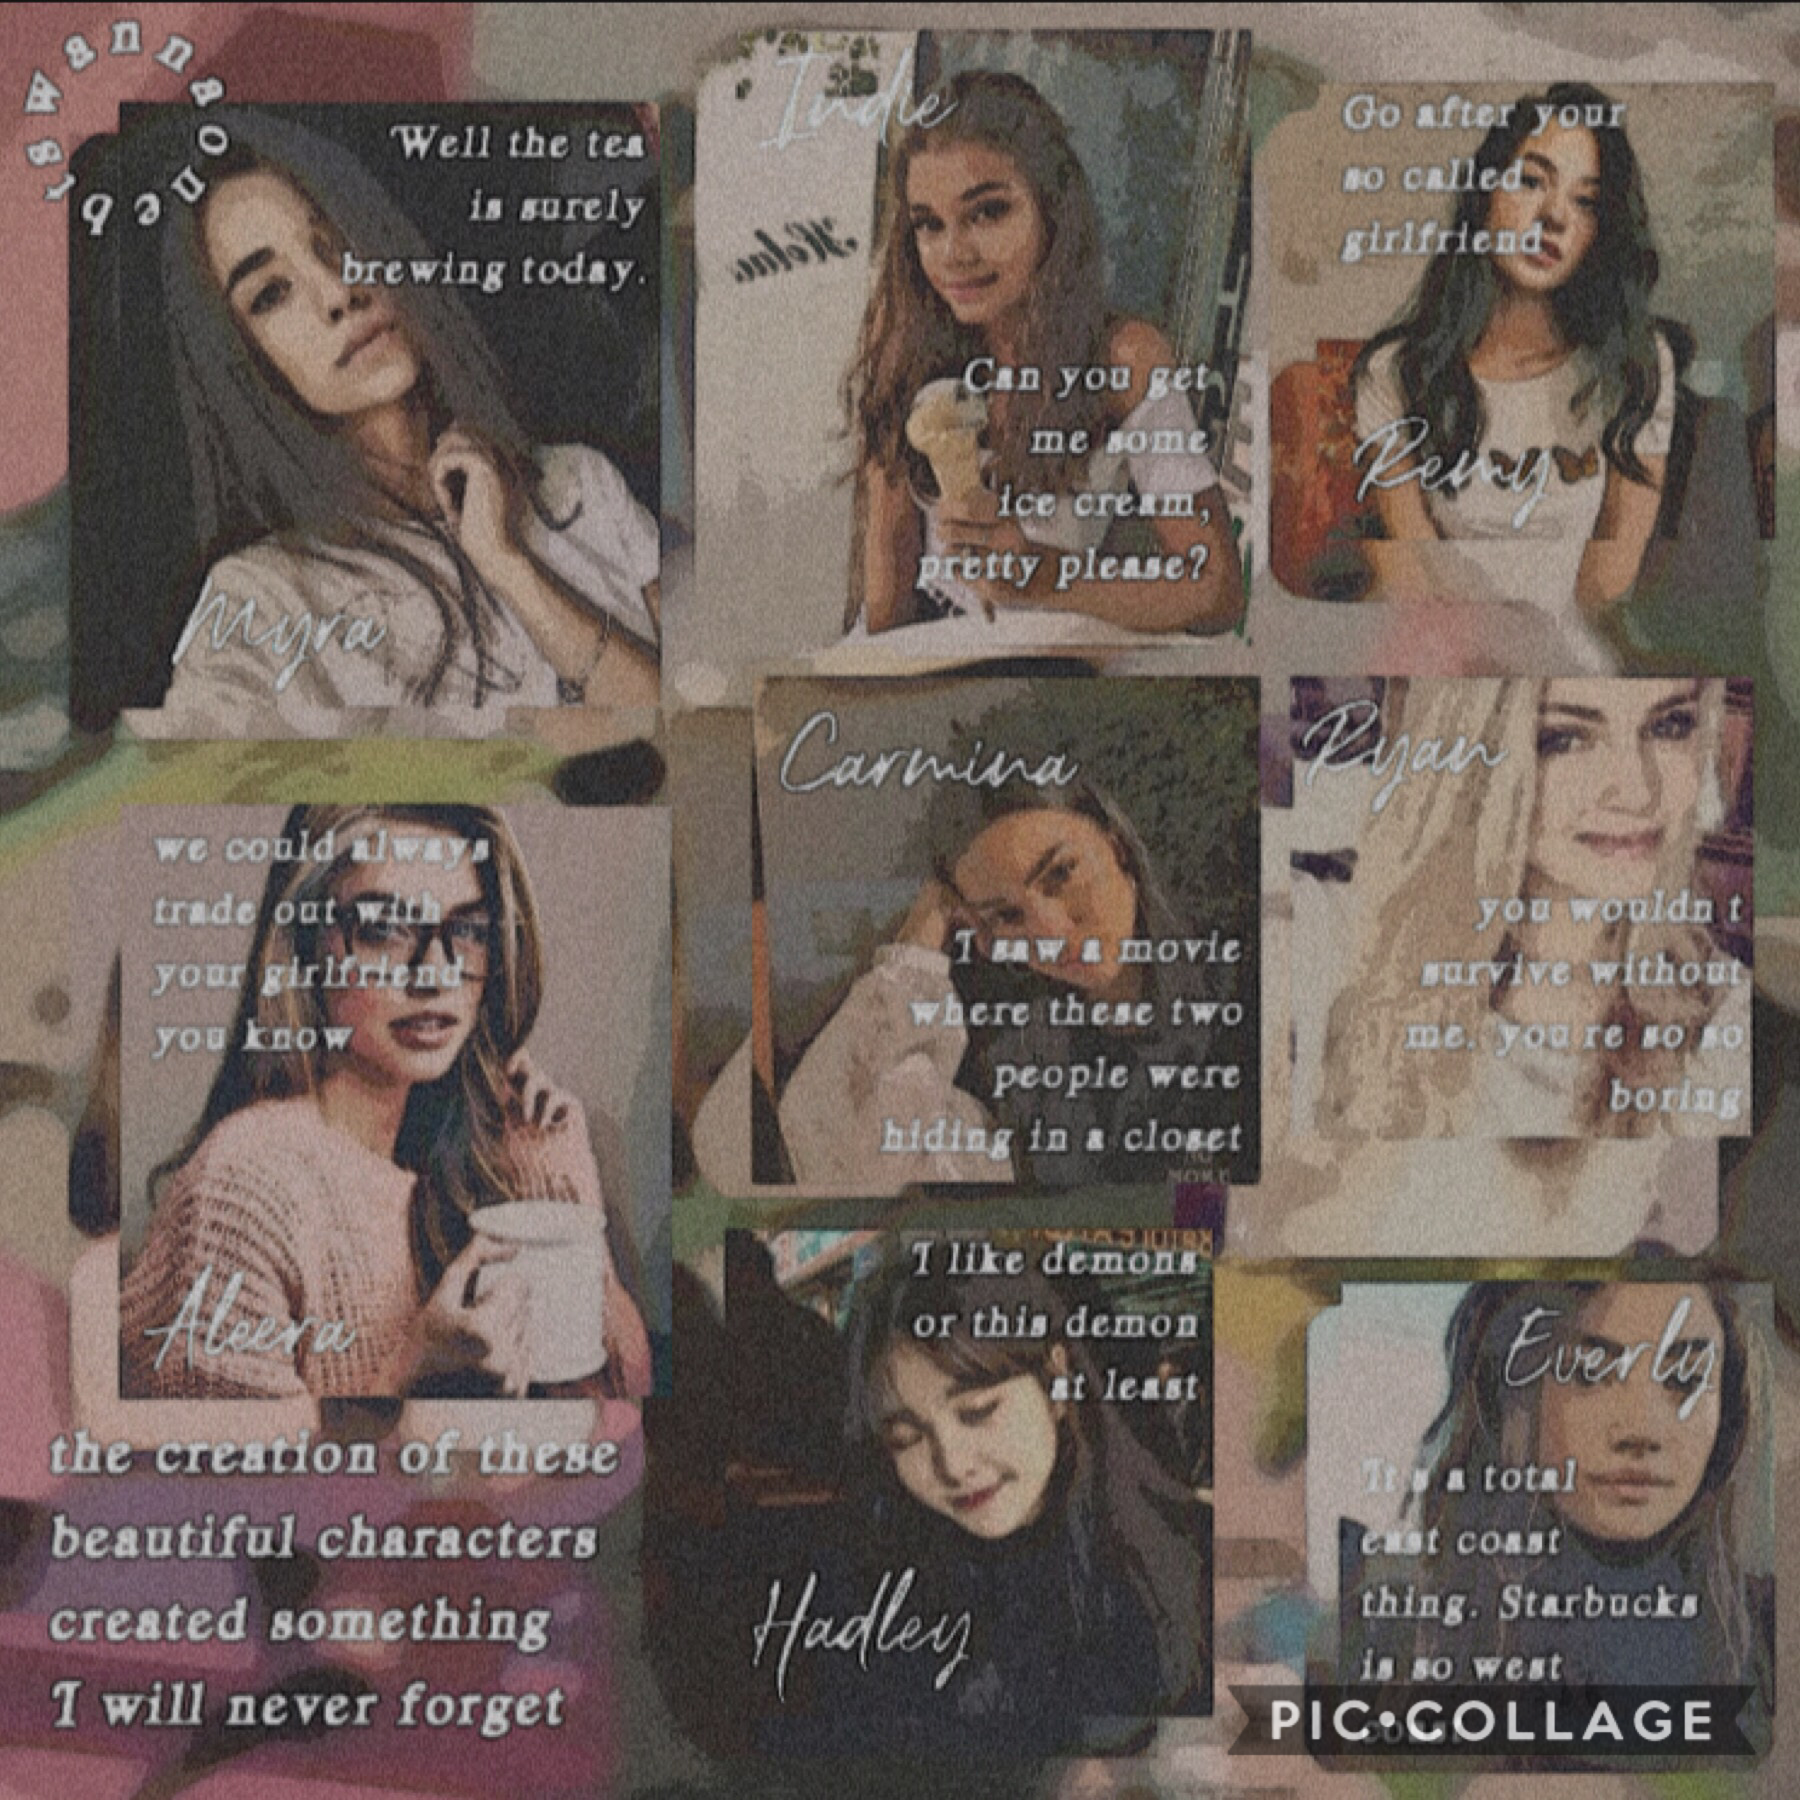 🌷TAP🌷
these characters are more than just RP OC’s to me.
y’all are more than just online friends- you guys are very important and i love you all so much you don’t even know